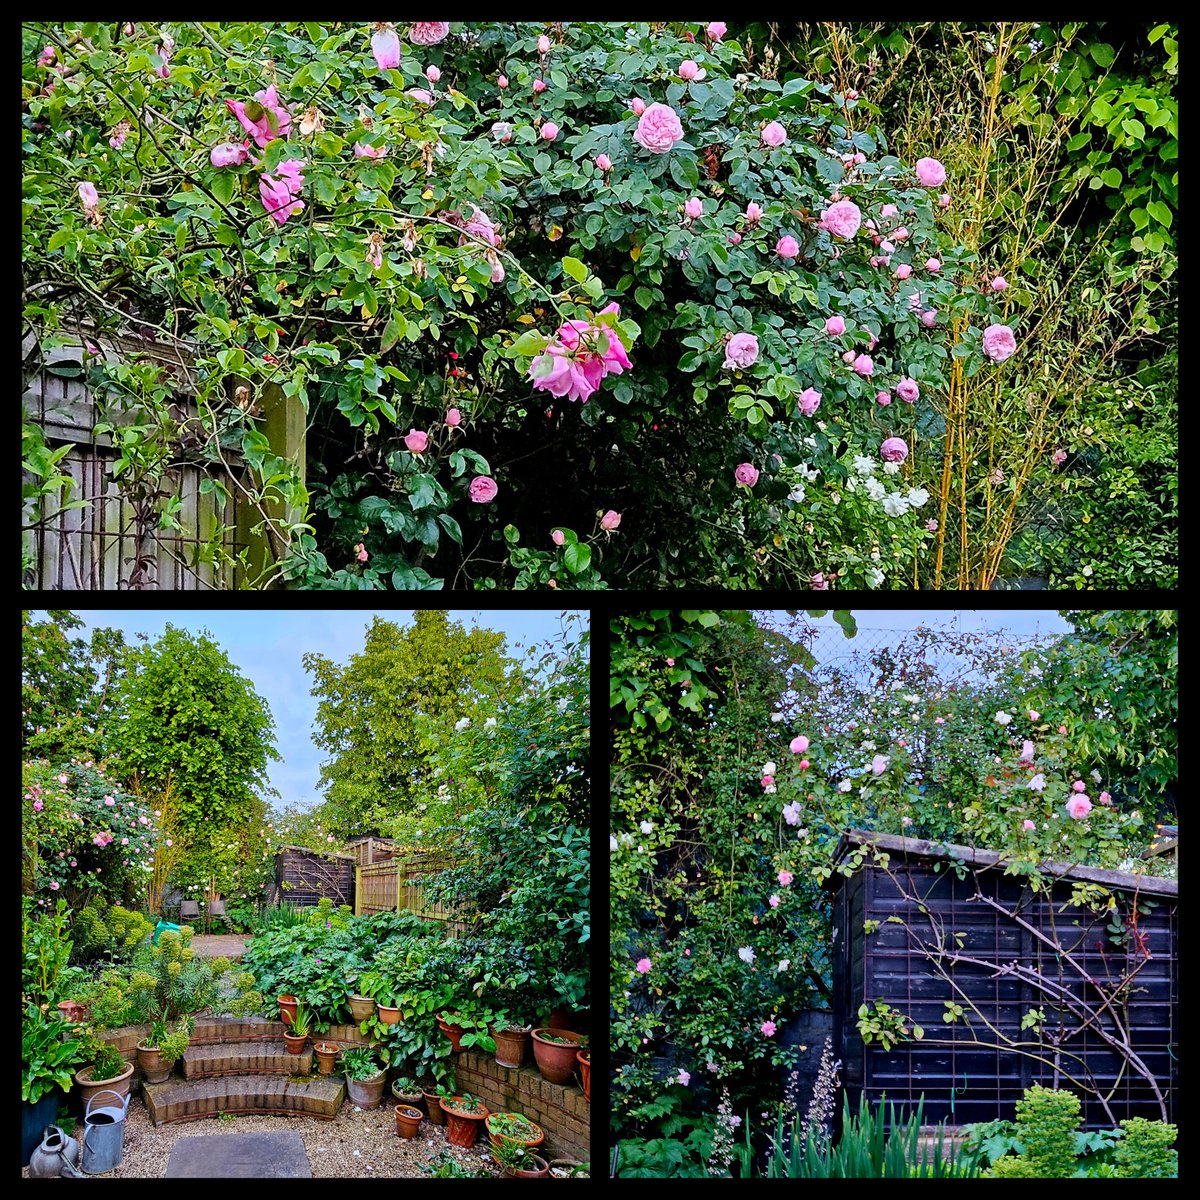 Peak rose in SW12. Our roses are really late spring flowers. 
In our imagination, they're part of mid-to-late summer, heat & bbqs & parched gardens. Then every year  they sneakily build buds from April & suddenly bloom in late May/ early June. You'd think we'd learn .... 😬